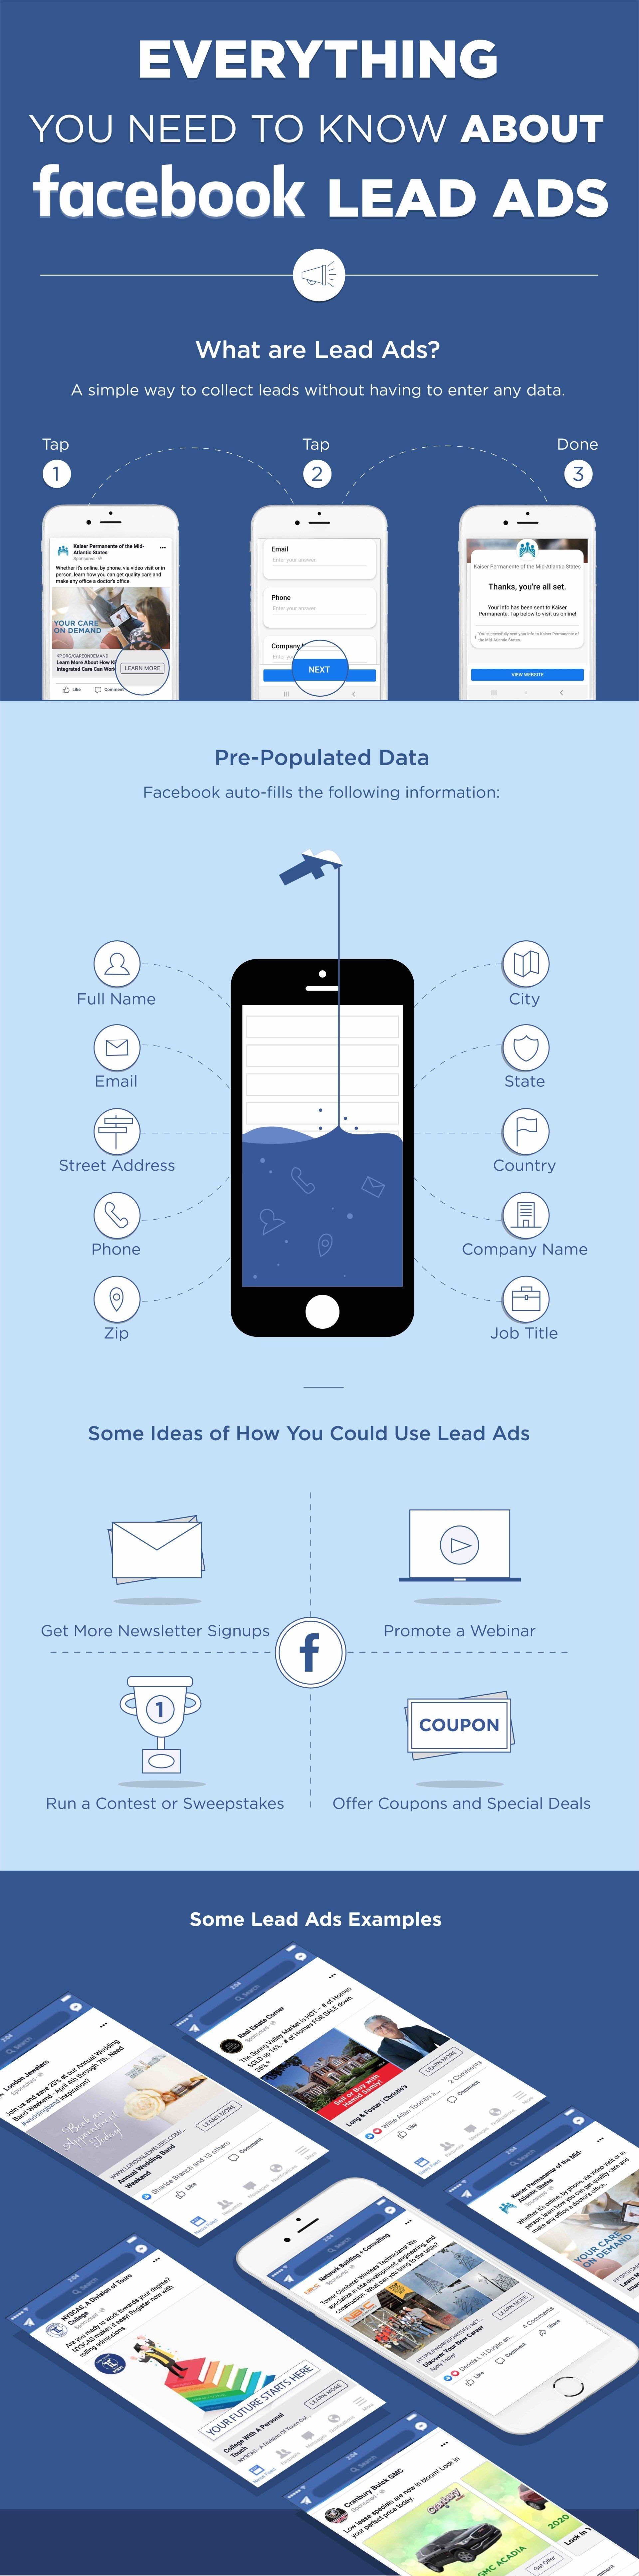 Everything You Need to Know About Facebook Lead Ads